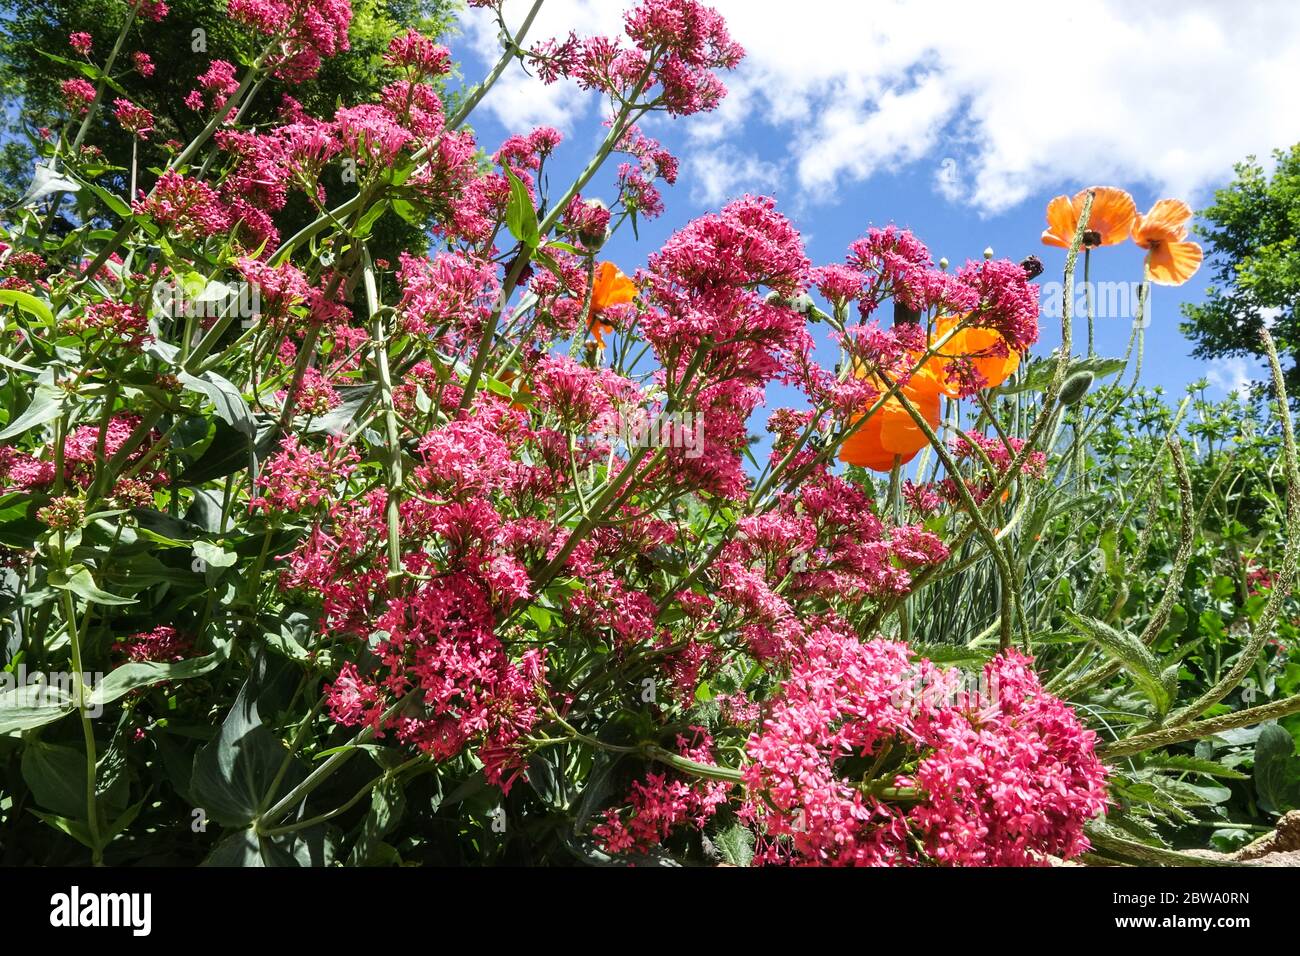 Red valerian Centranthus ruber grows in garden bed, poppies Stock Photo